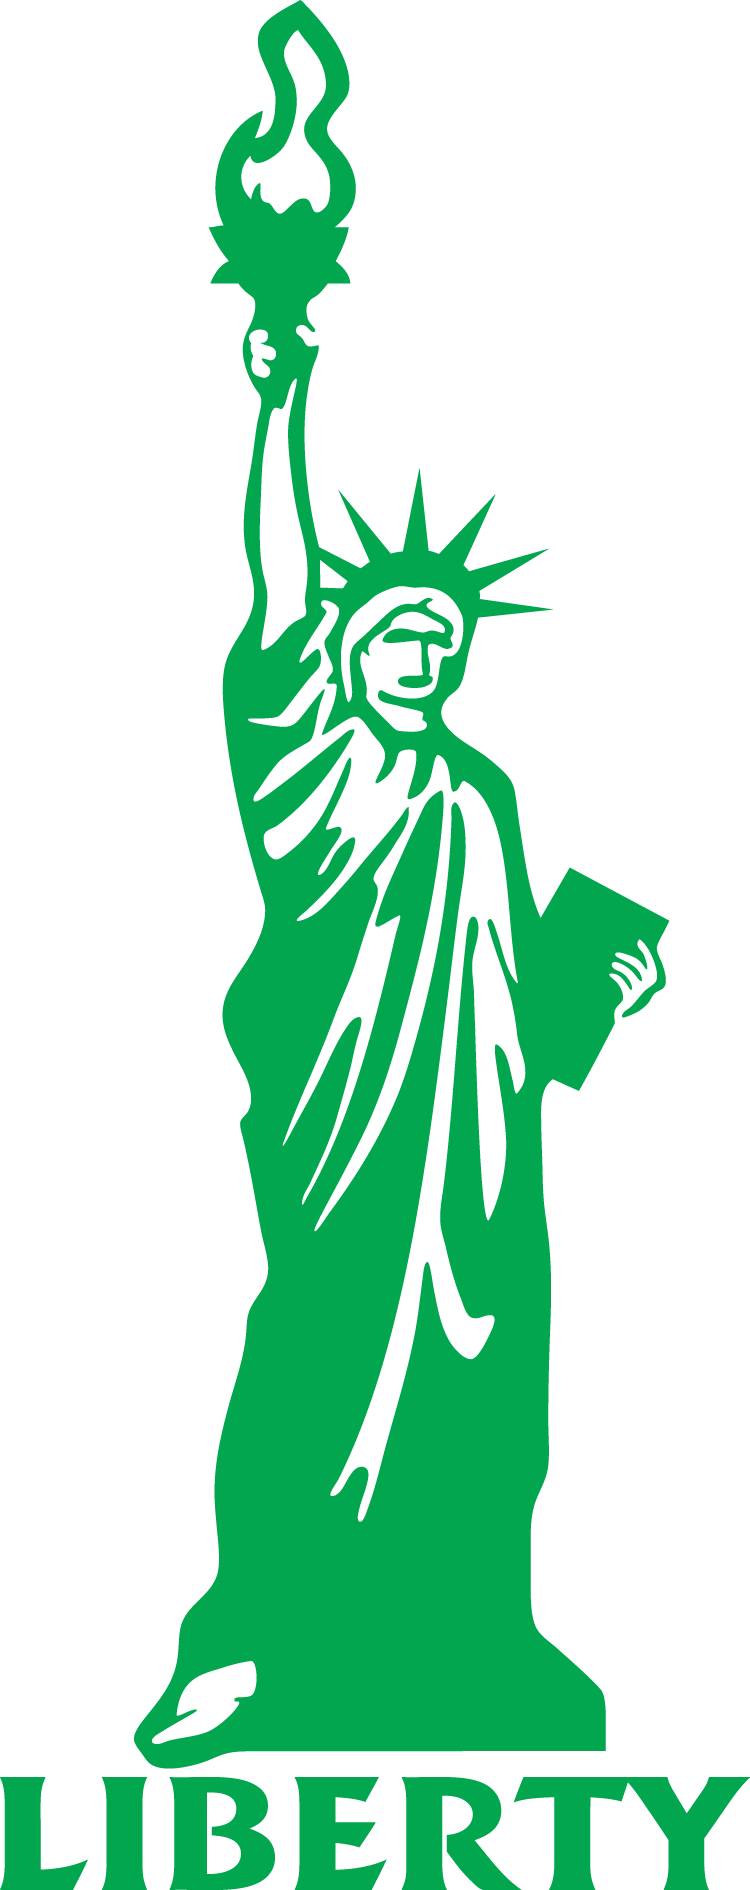 Statue of Liberty (NY2) [NY2] - $4.99 : Eyecandy Decals, Online ...